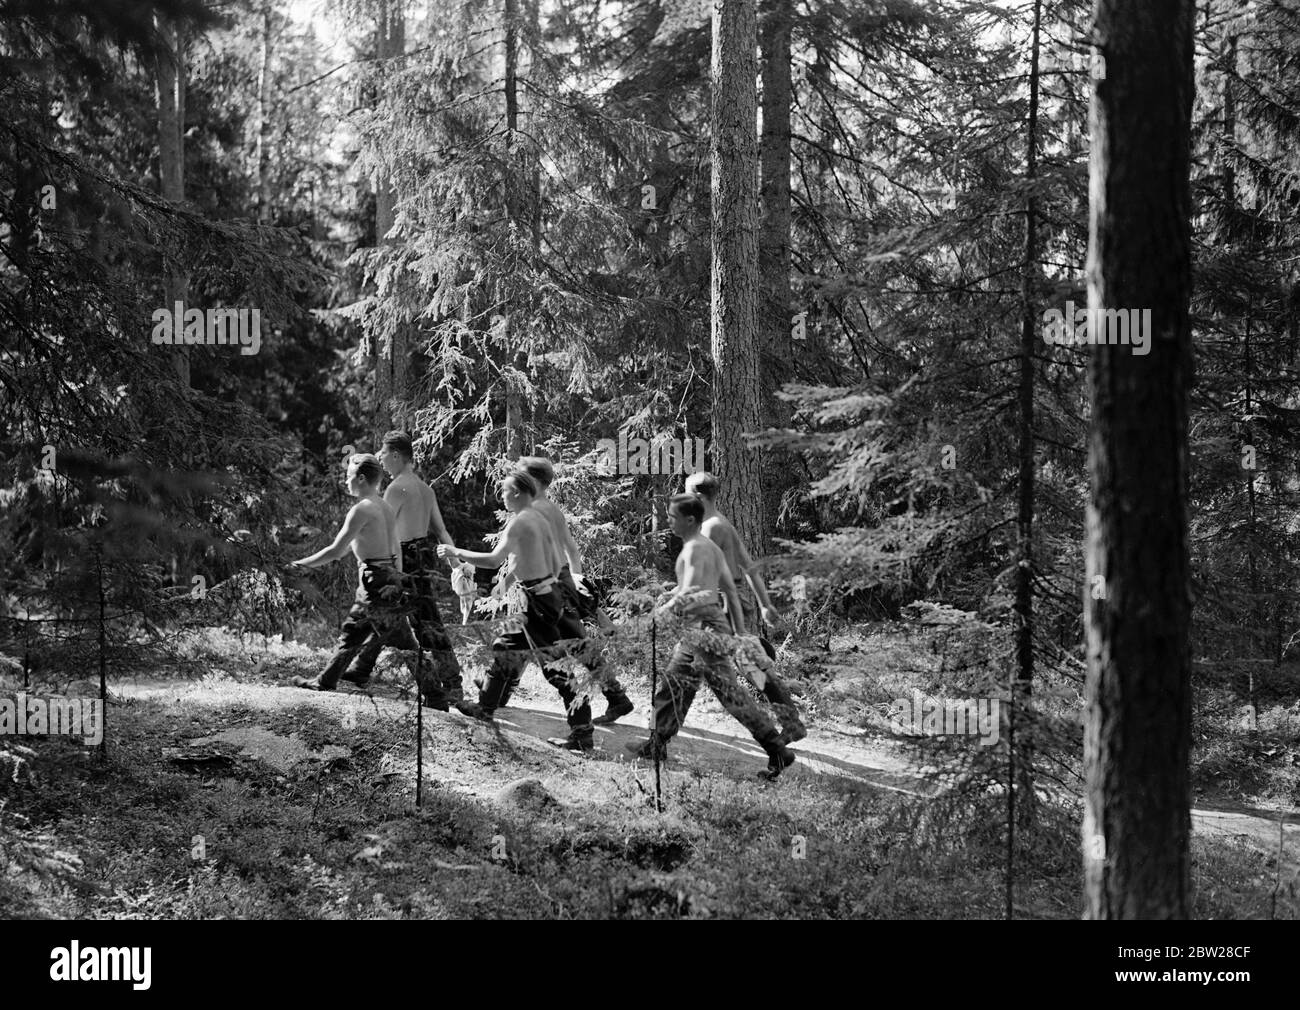 Worlds greatest foresters. Finland - Finnish daily life Forest Academy of  Korkeakoski 1939 The healthiest job in the world is forestry work. Six of  the students march to their assignment. Discipline is